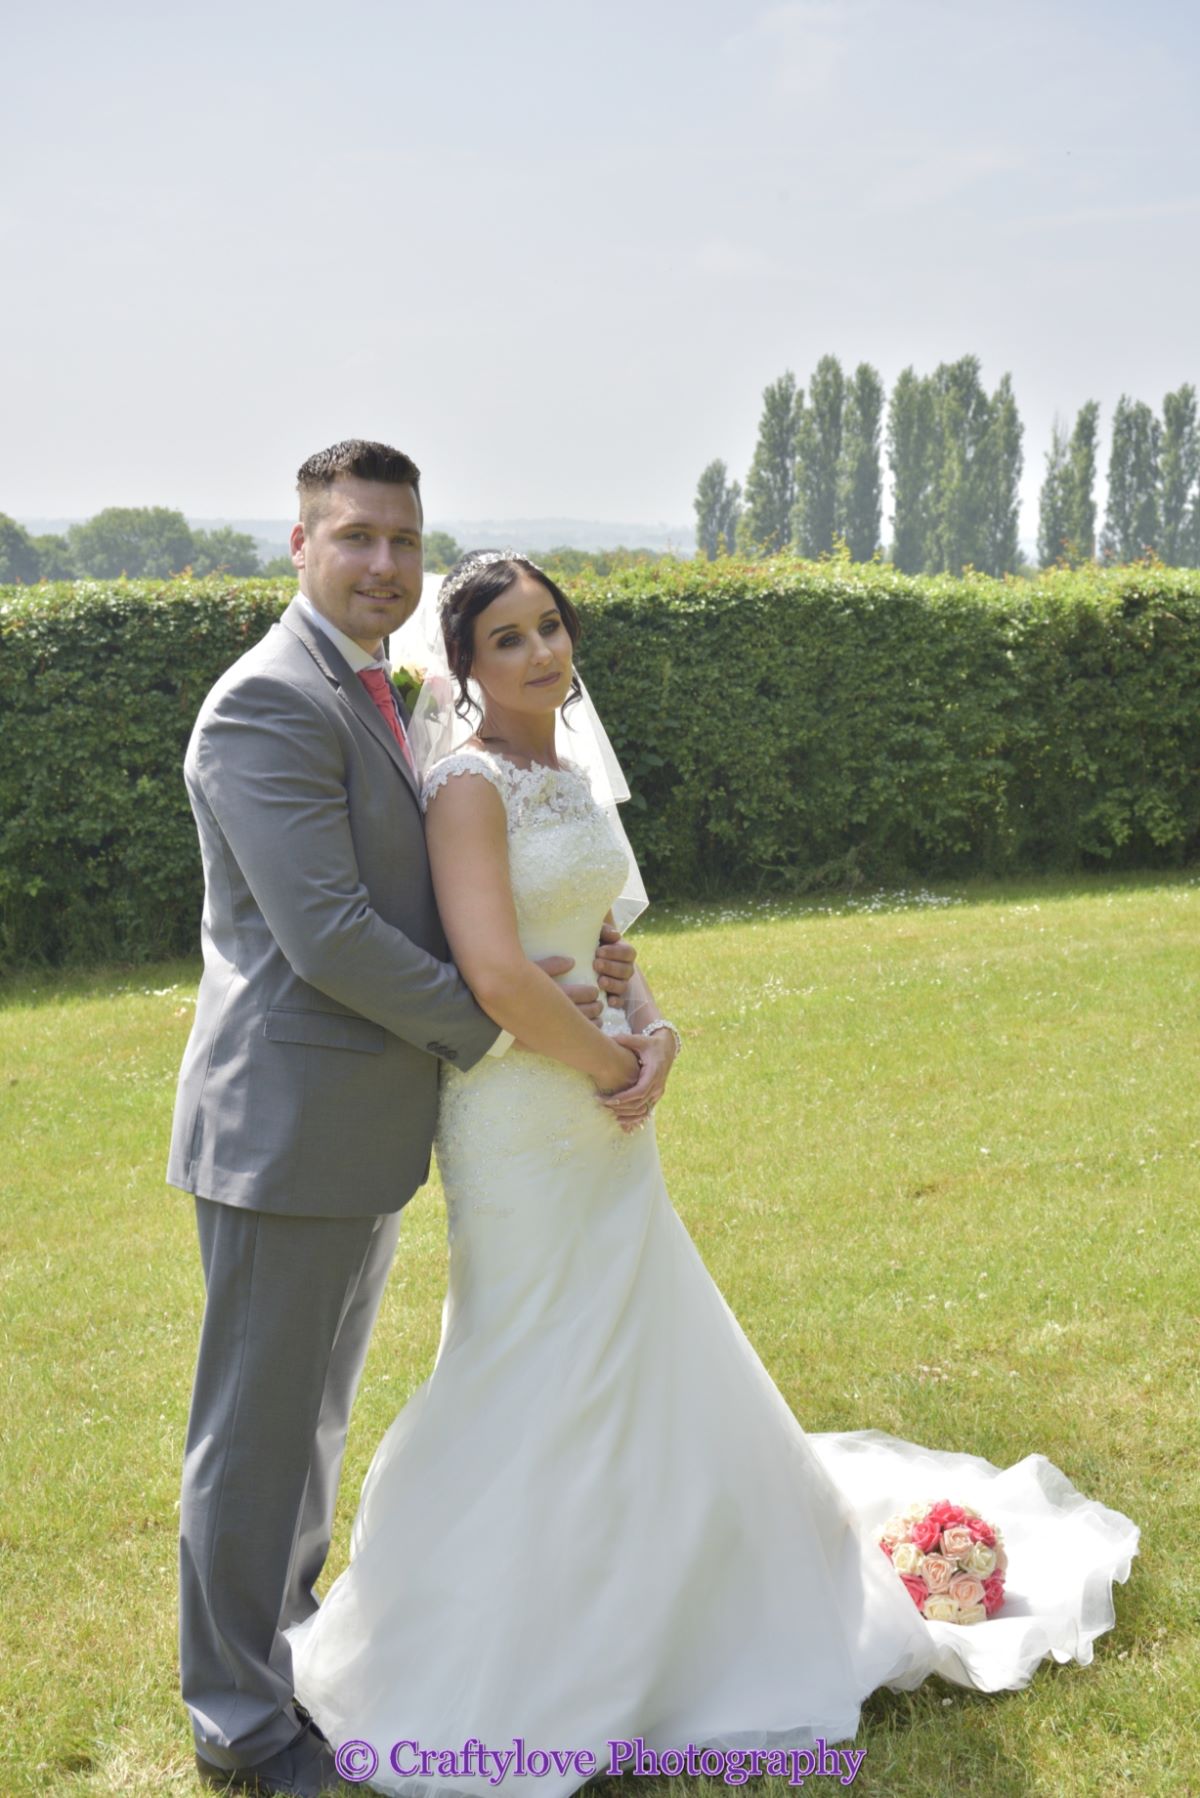 A lovely wedding at Kings croft hotel, Craftylove Photography